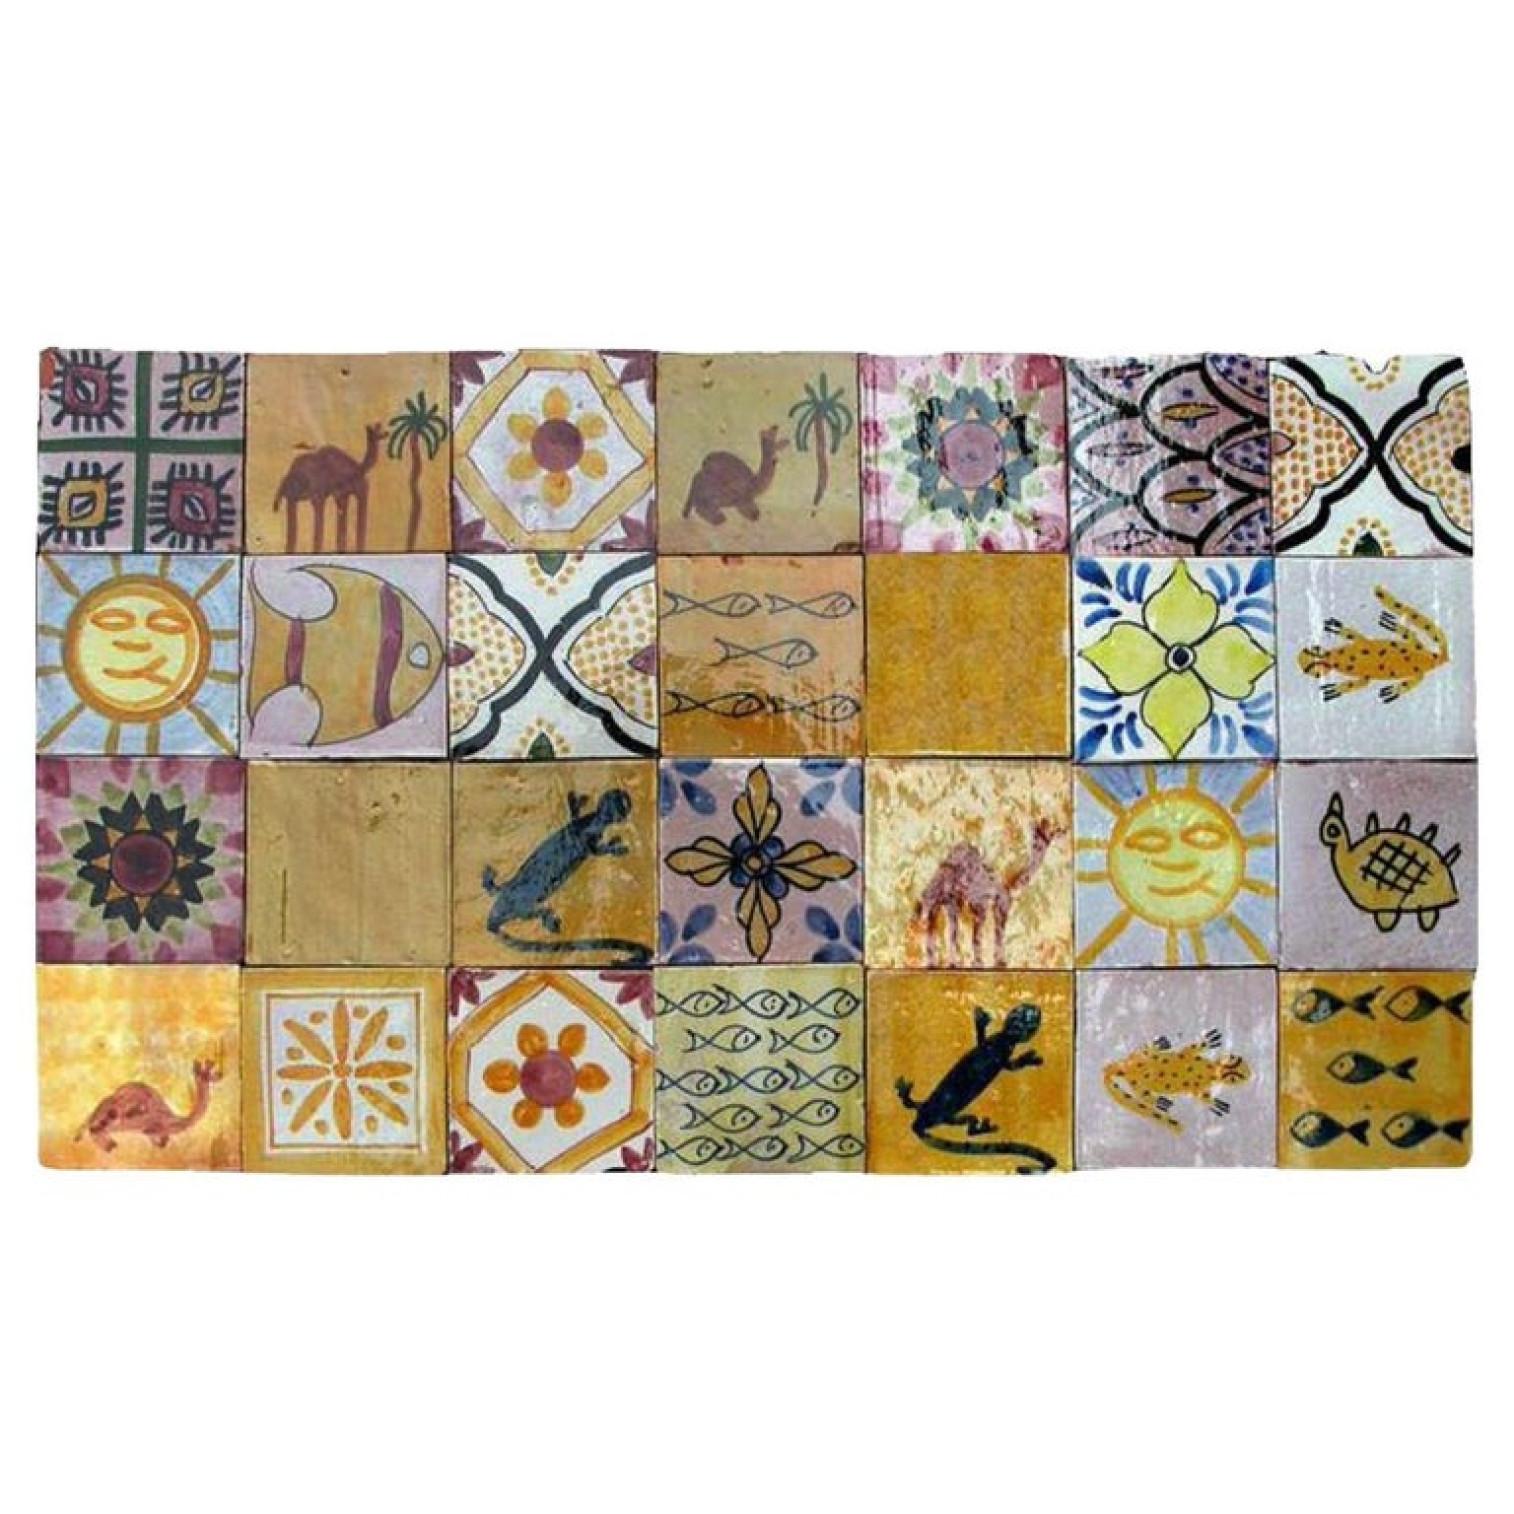 A colorful hand painted panel of 28 moroccan tiles. The tiles show sketches and symbols of the Berber culture. Like fish, camels, flowers, sun and salamanders. Each of them are unique.

The Berbers (or Amazigh) are the indigenous inhabitants of